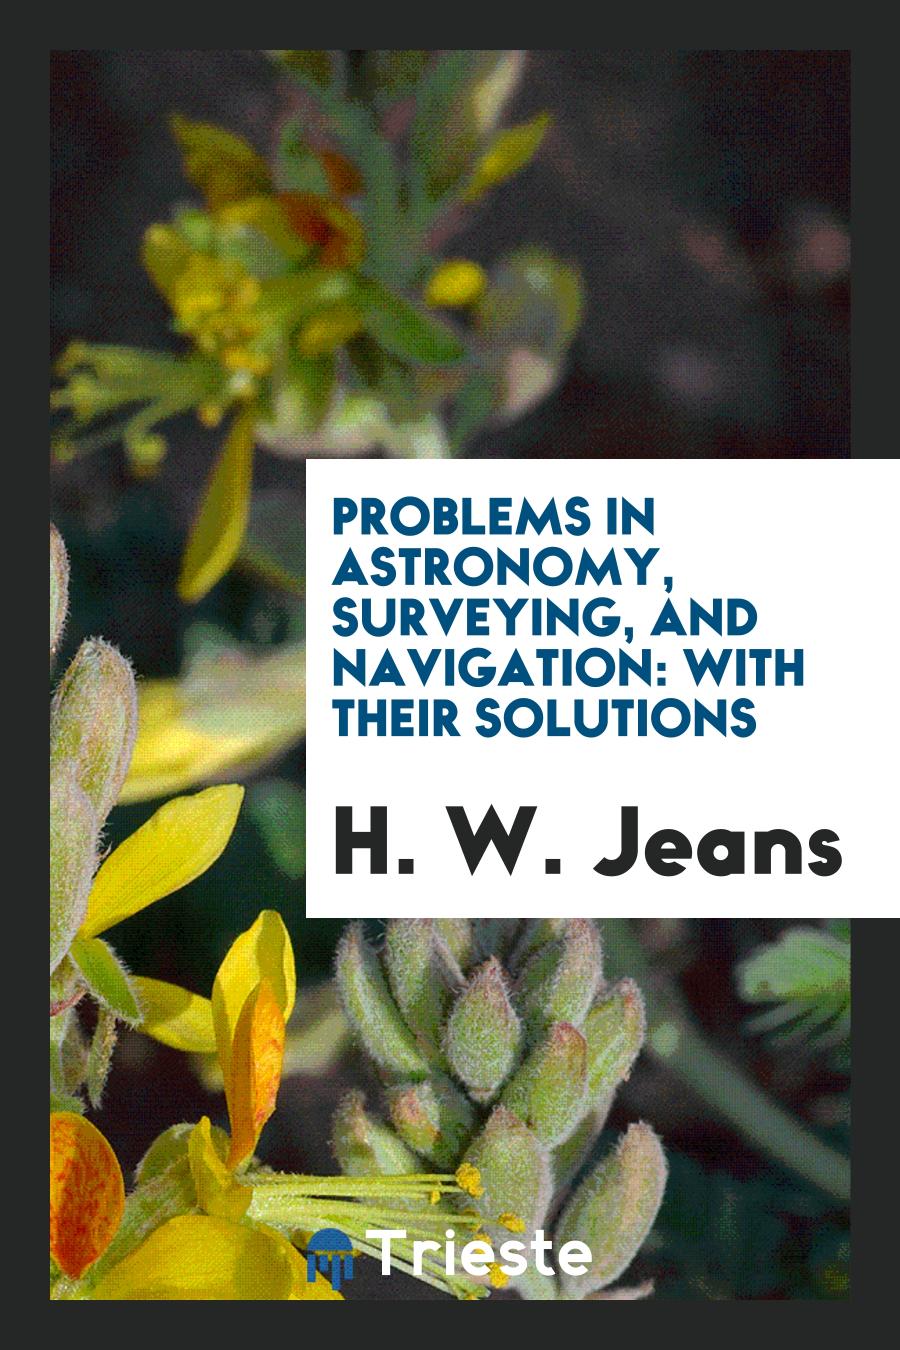 Problems in Astronomy, Surveying, and Navigation: With Their Solutions